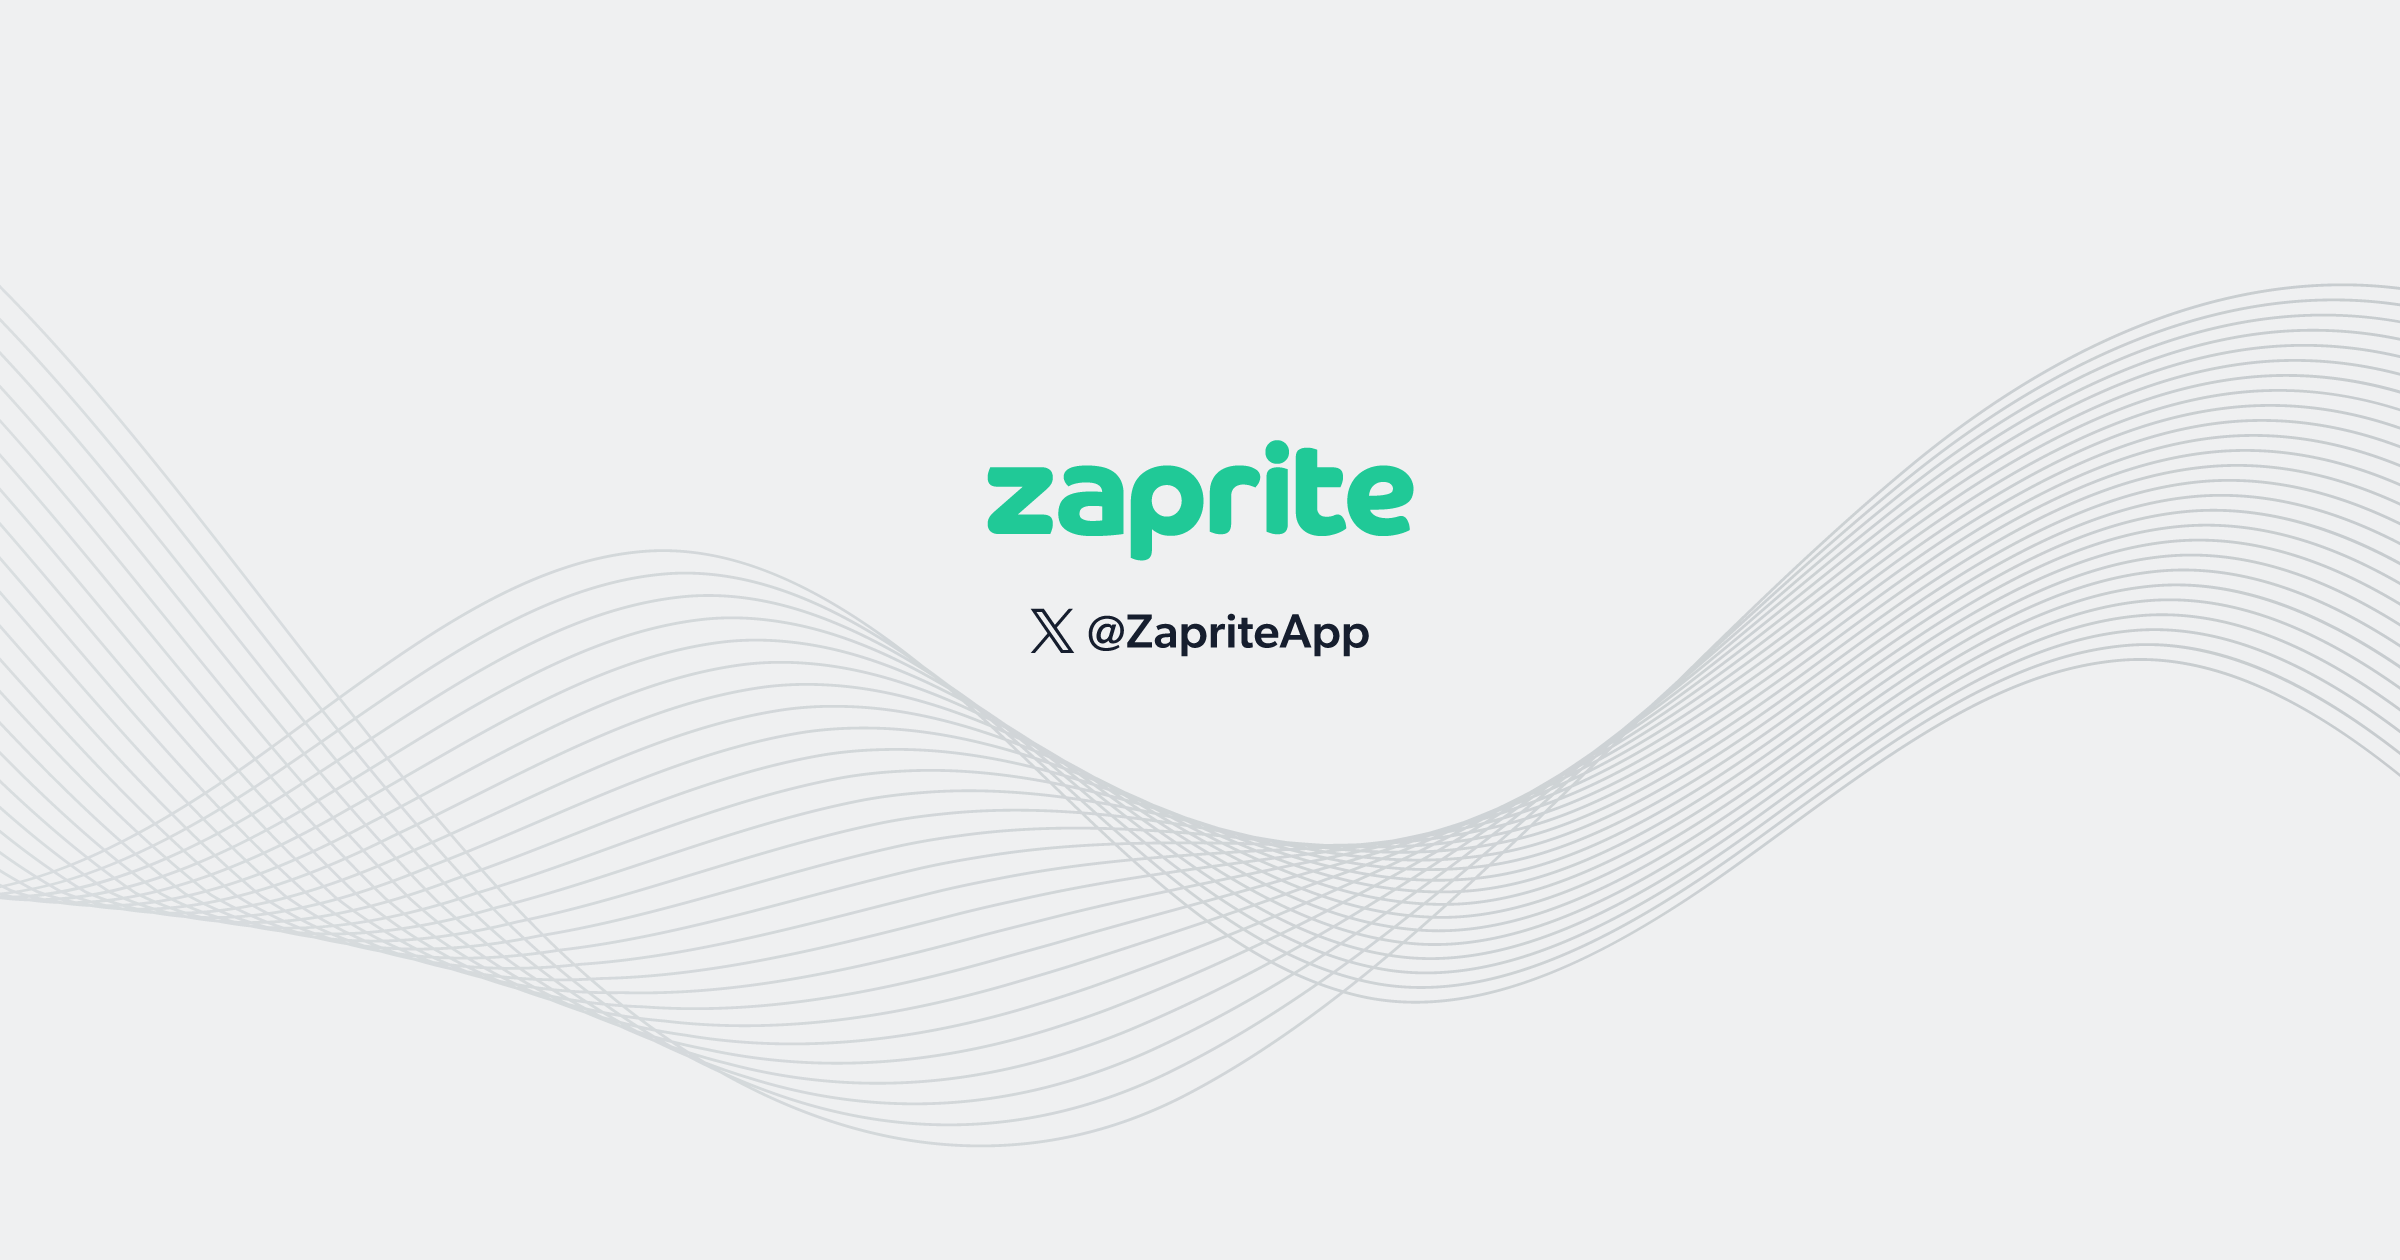 Zaprite Welcomes Parker Lewis And Will Cole To The Team